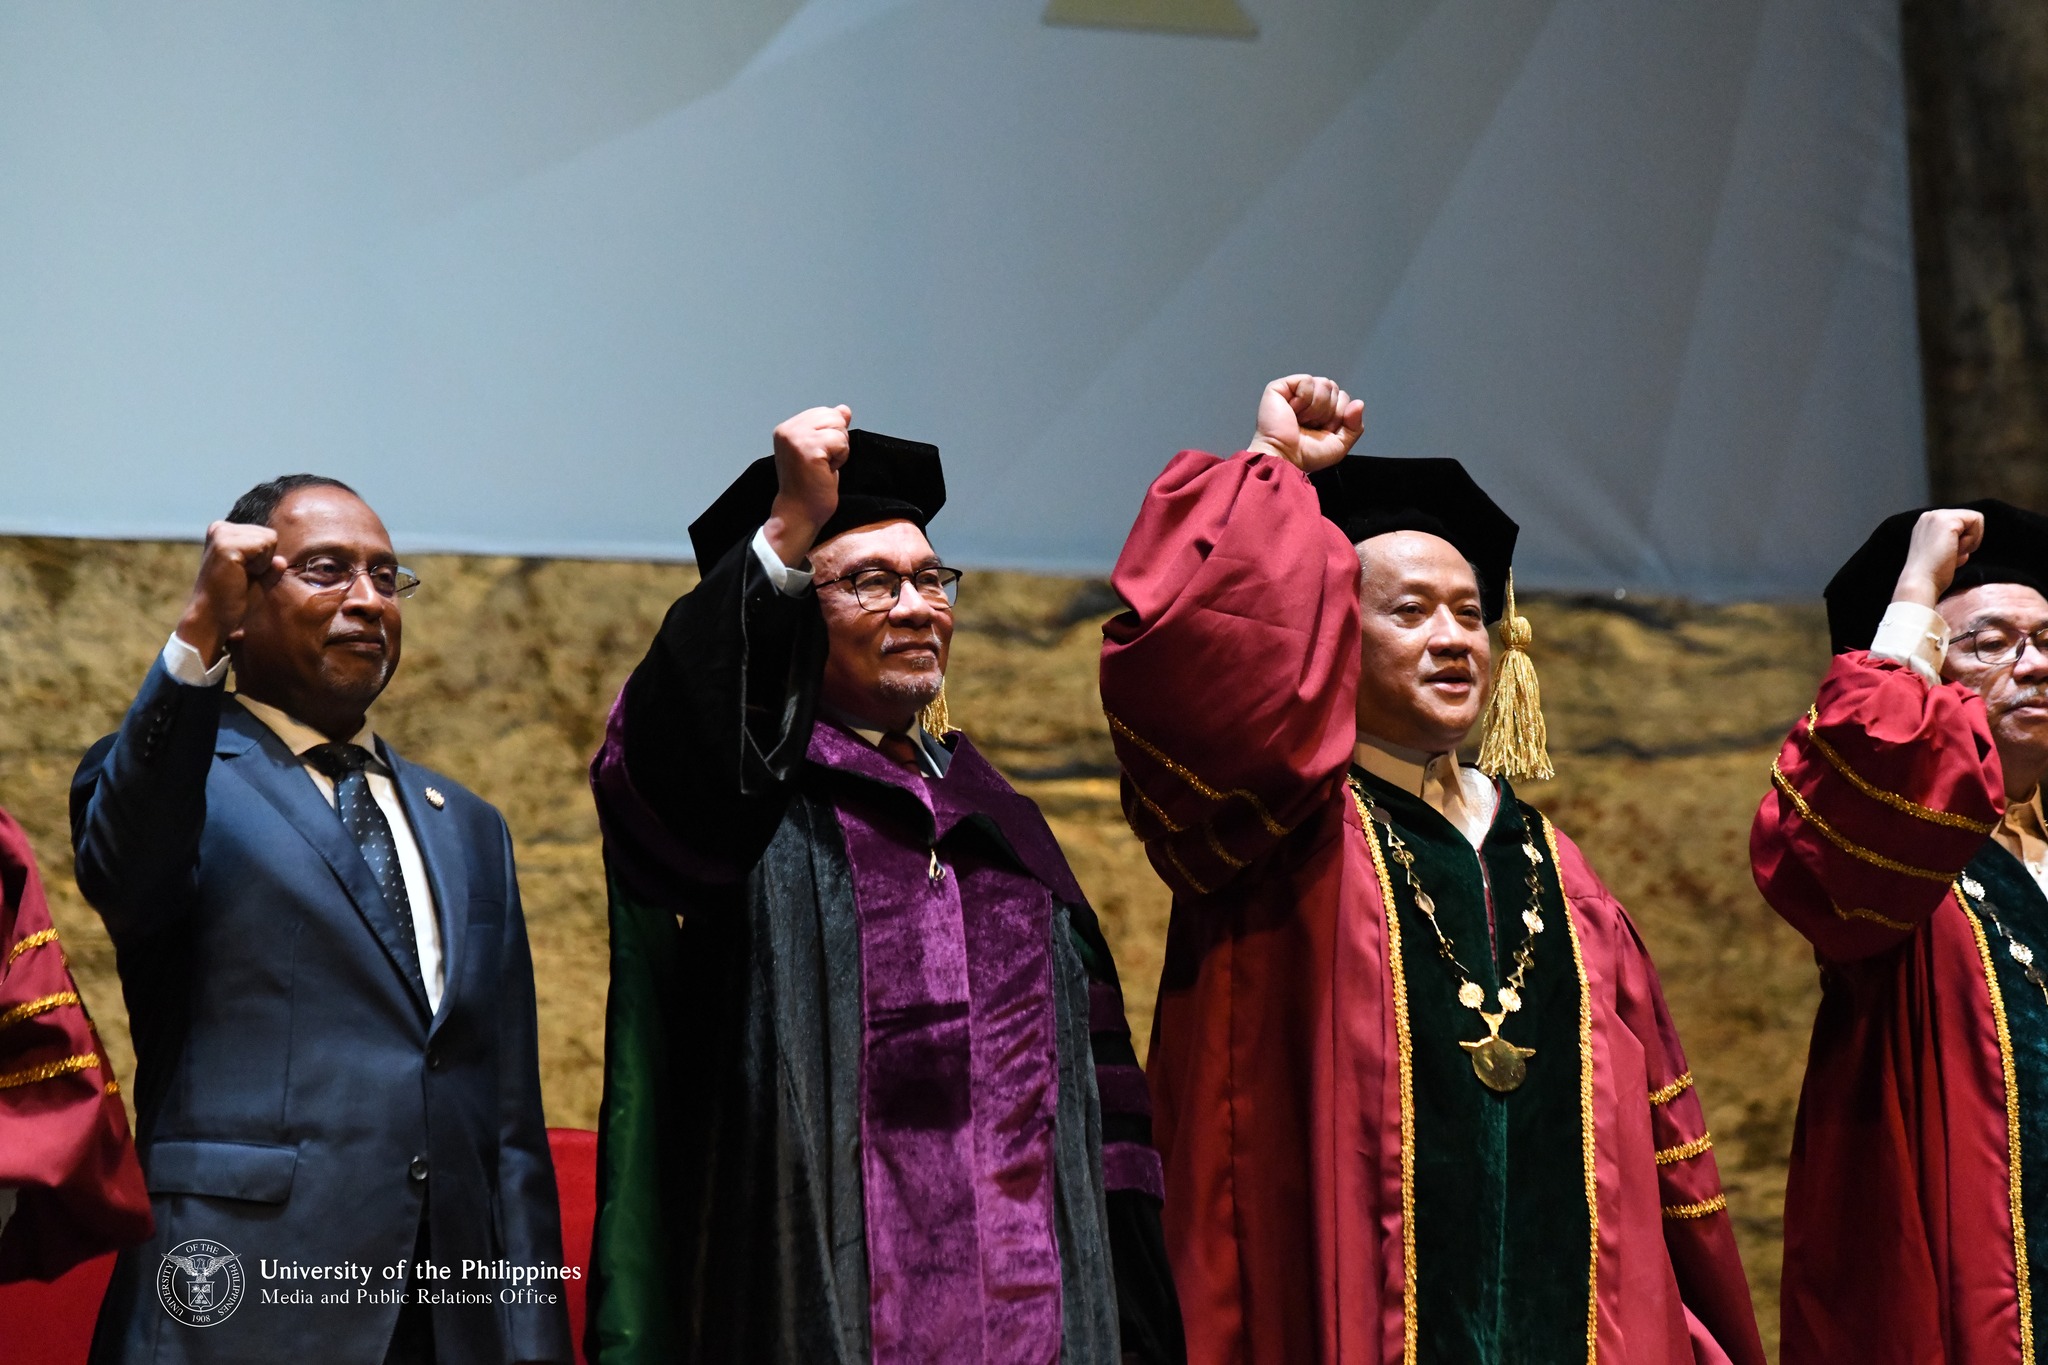 Pm anwar awarded doctorate degree 03